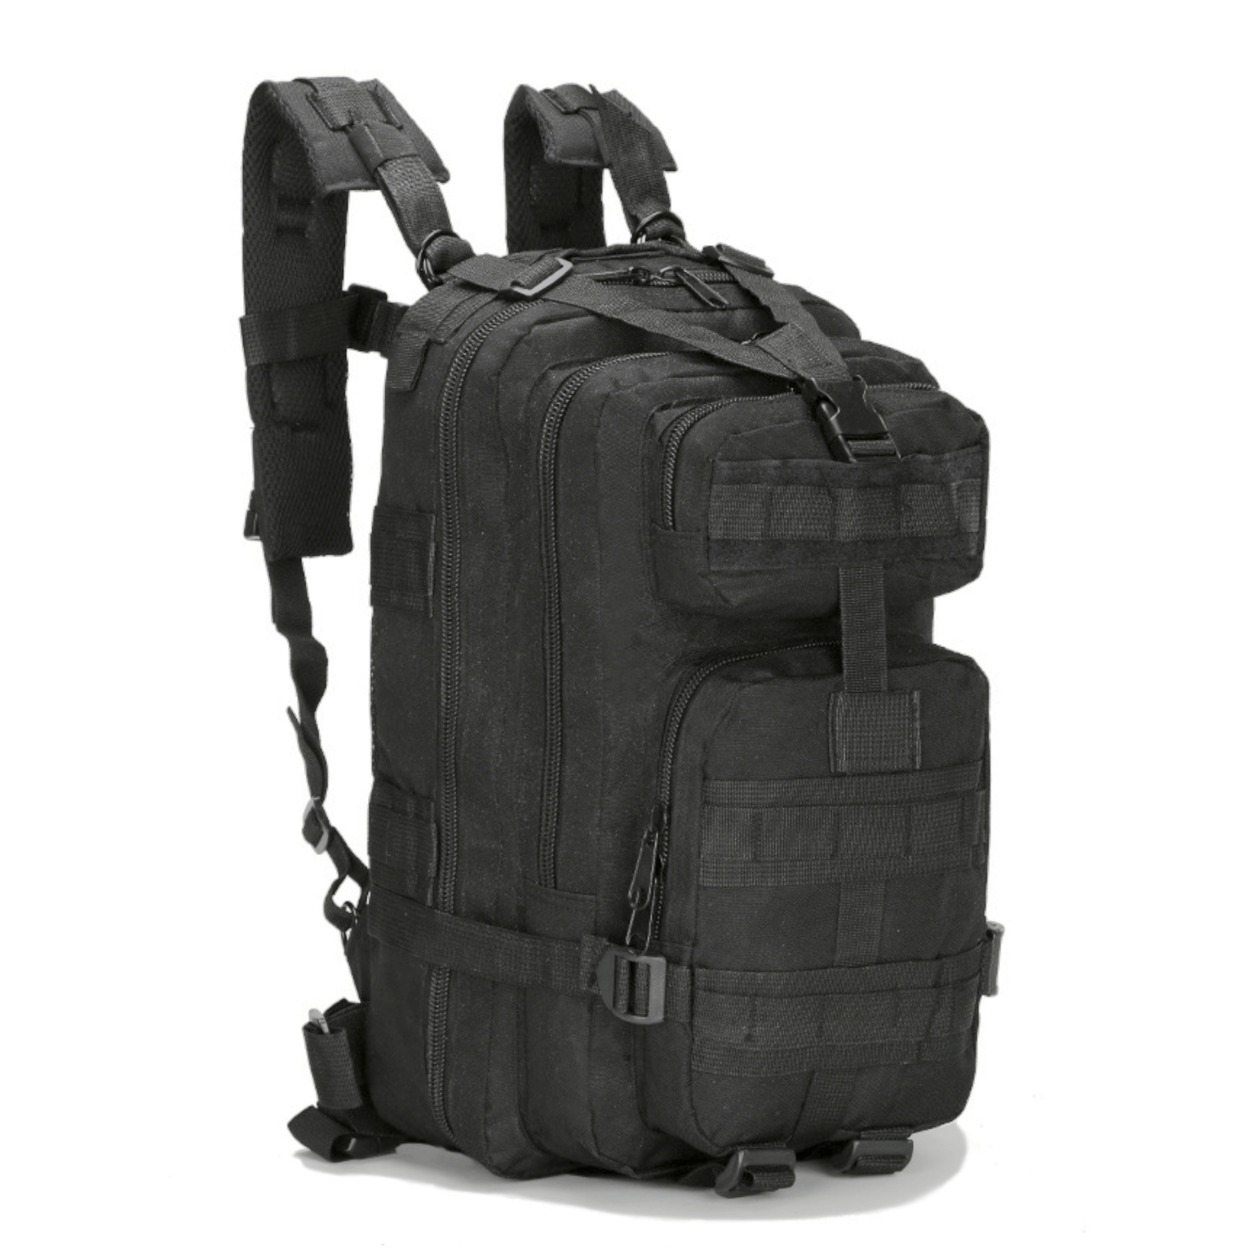 Tactical 25L Molle Backpack - ACU Camouflage